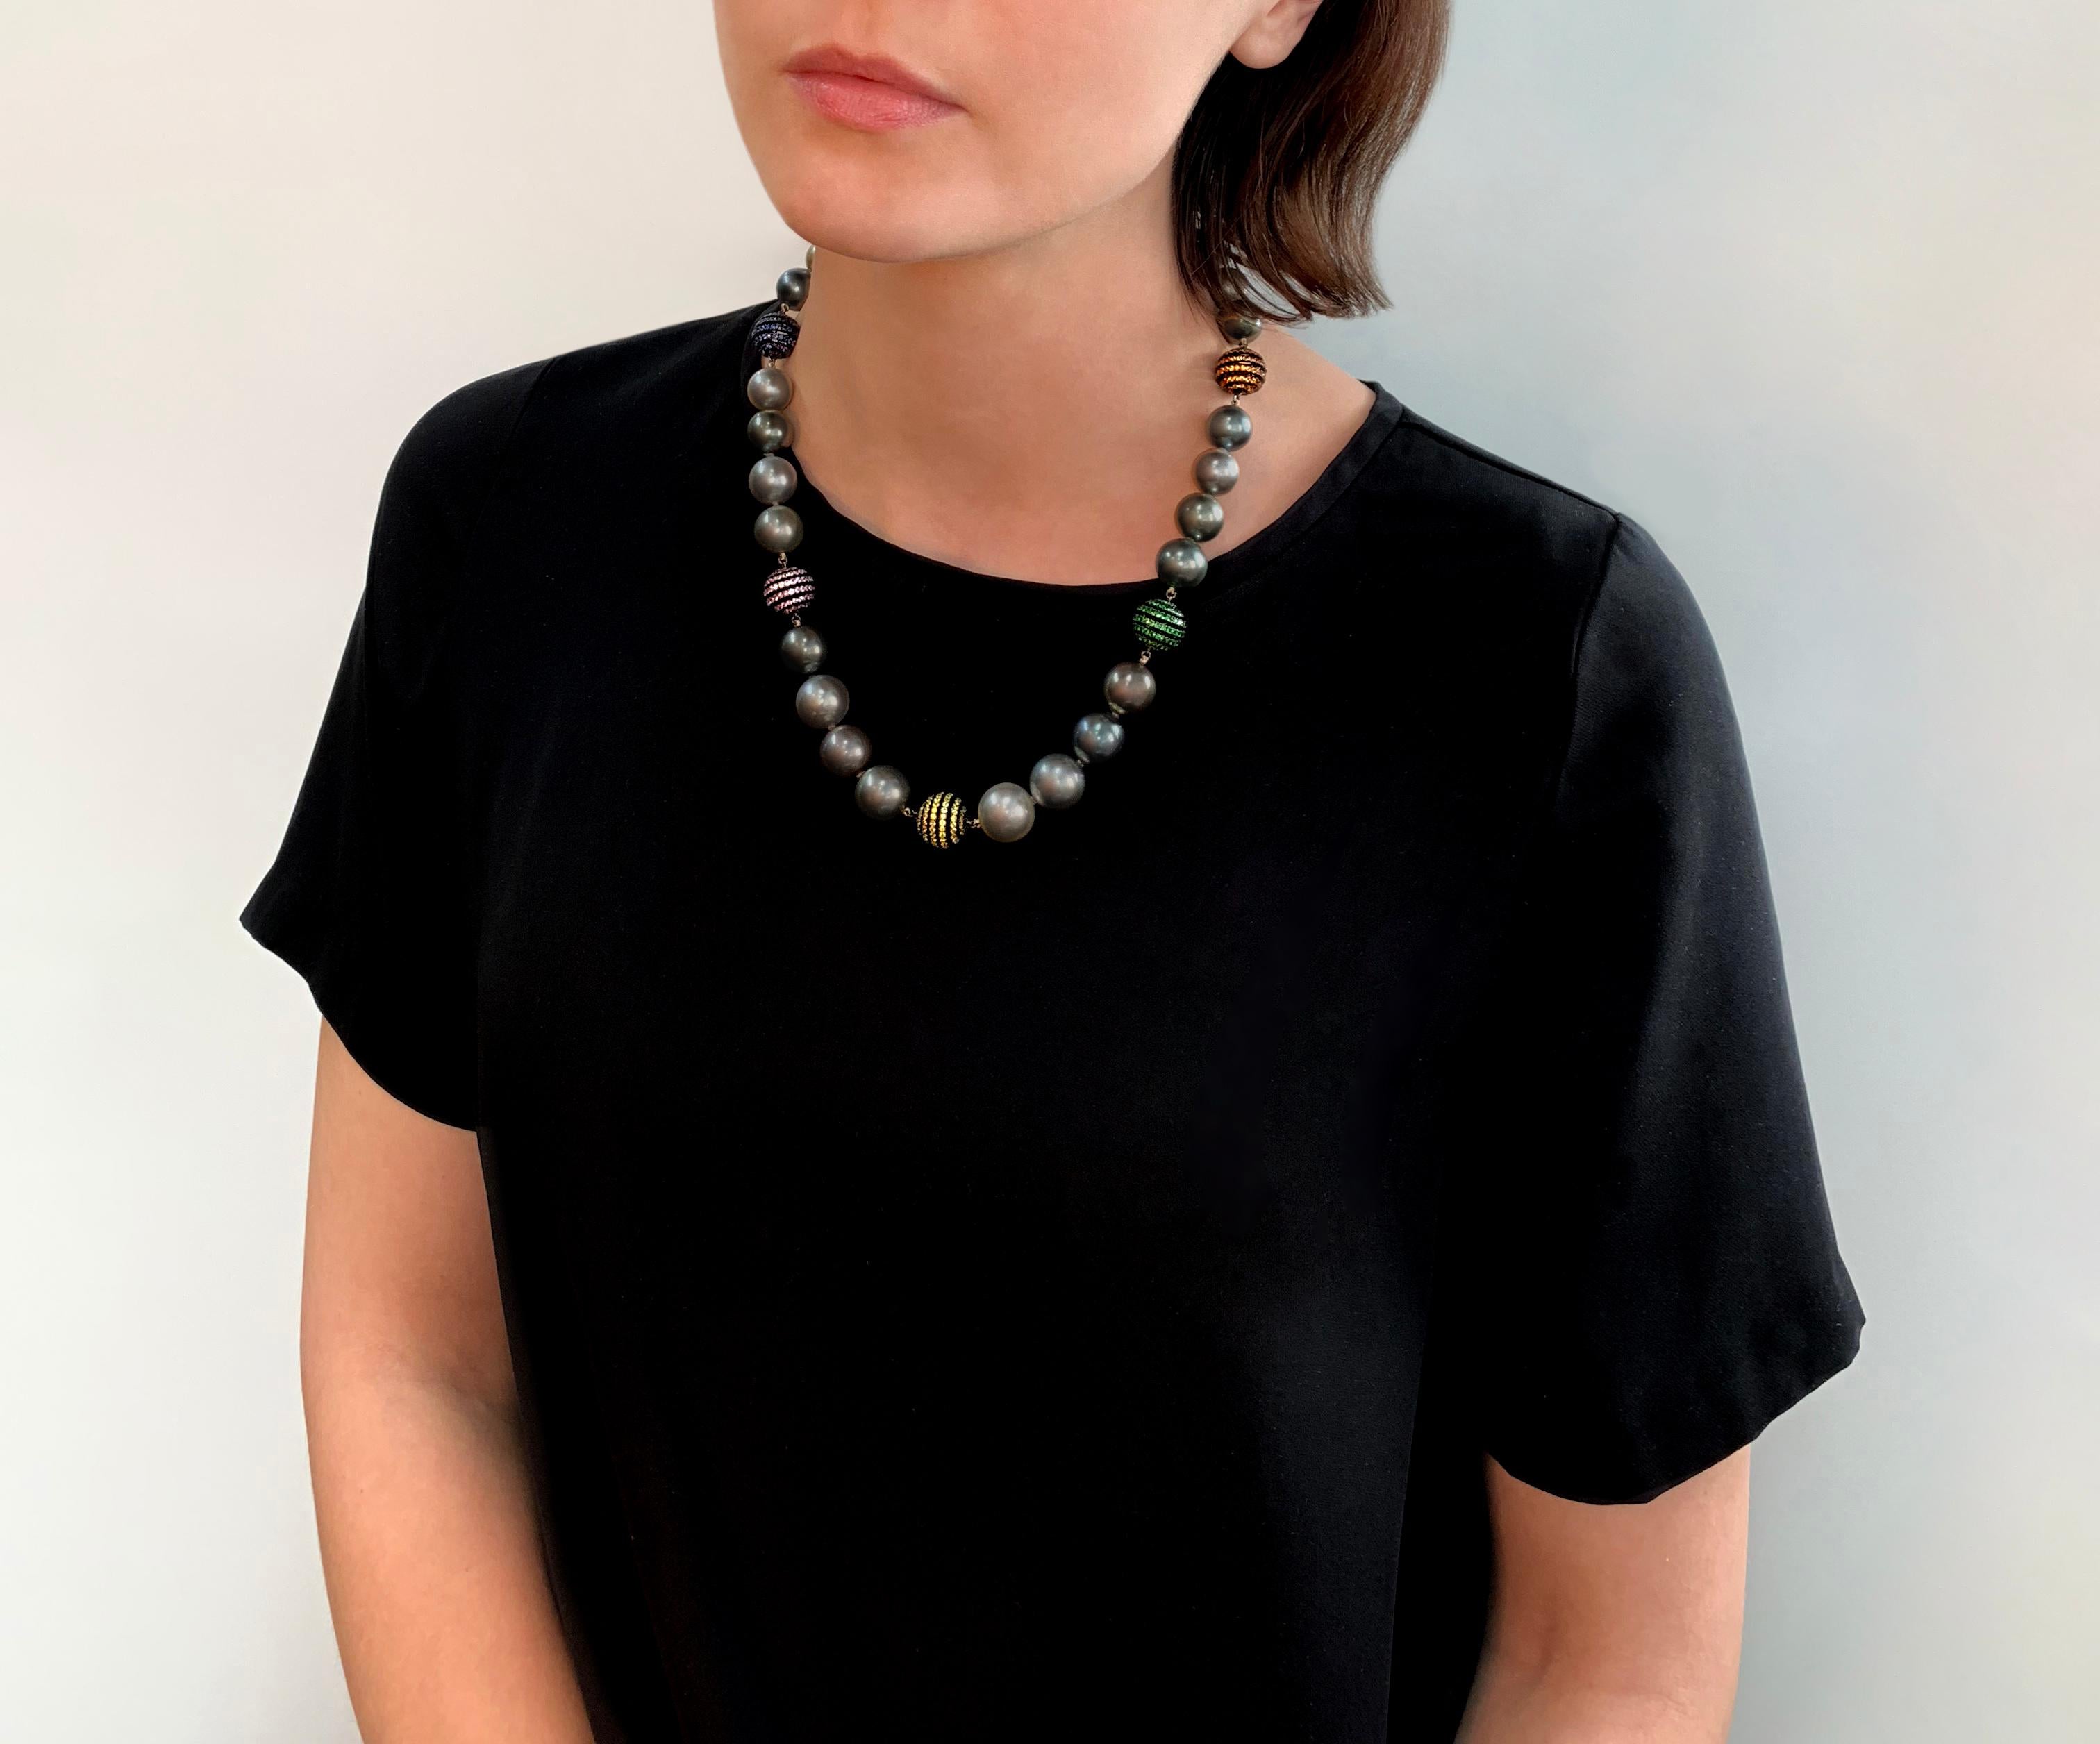 This hypnotic necklace by Yoko London features a spectacular combination of cool Tahitian pearls and multi-coloured Sapphires. The vibrant colours of the sapphires stand in perfect contrast to the silver hues of the Tahitian pearls, making for a